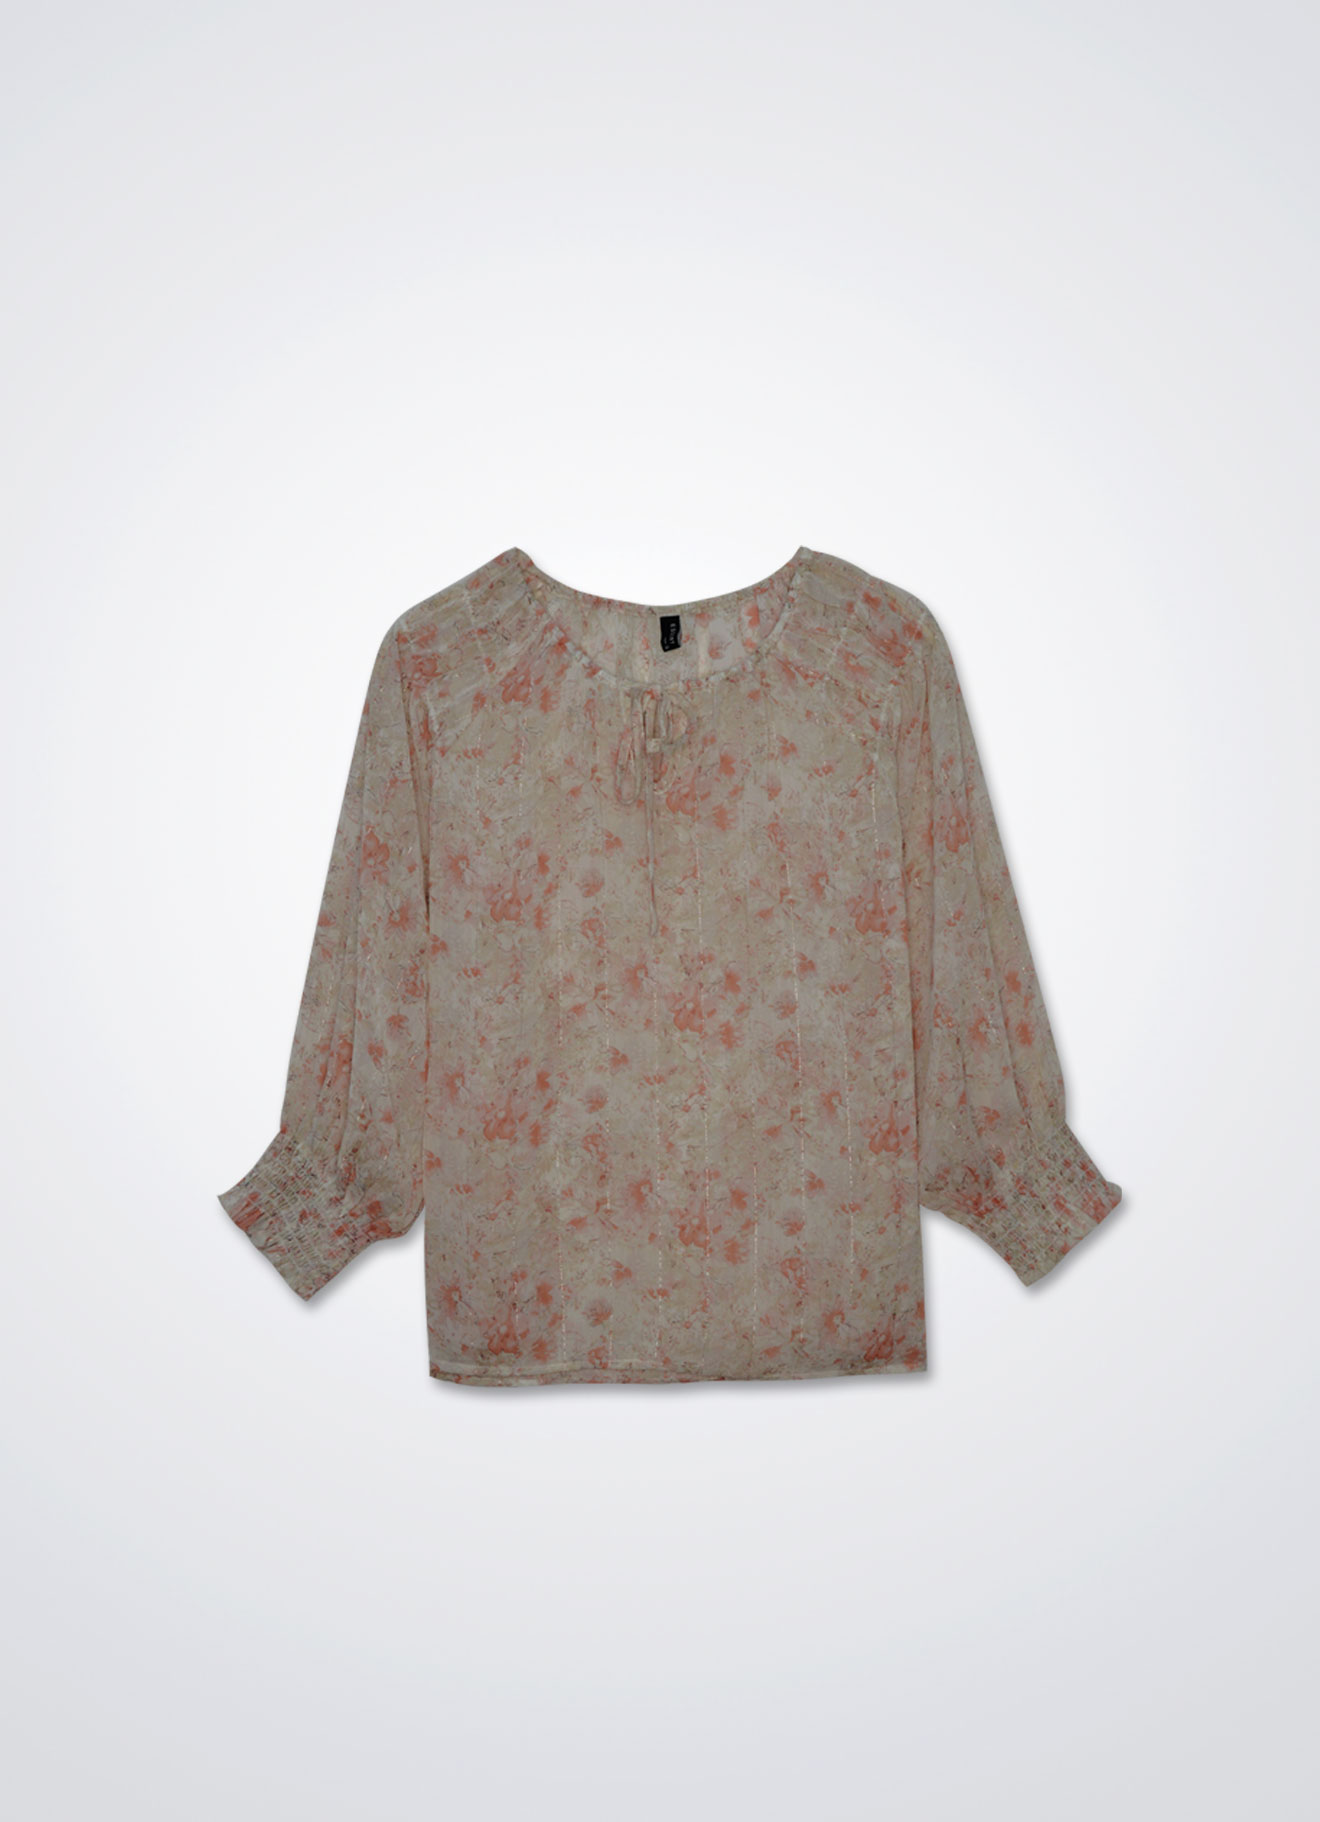 Brandied-Melon by Sleeve Blouse